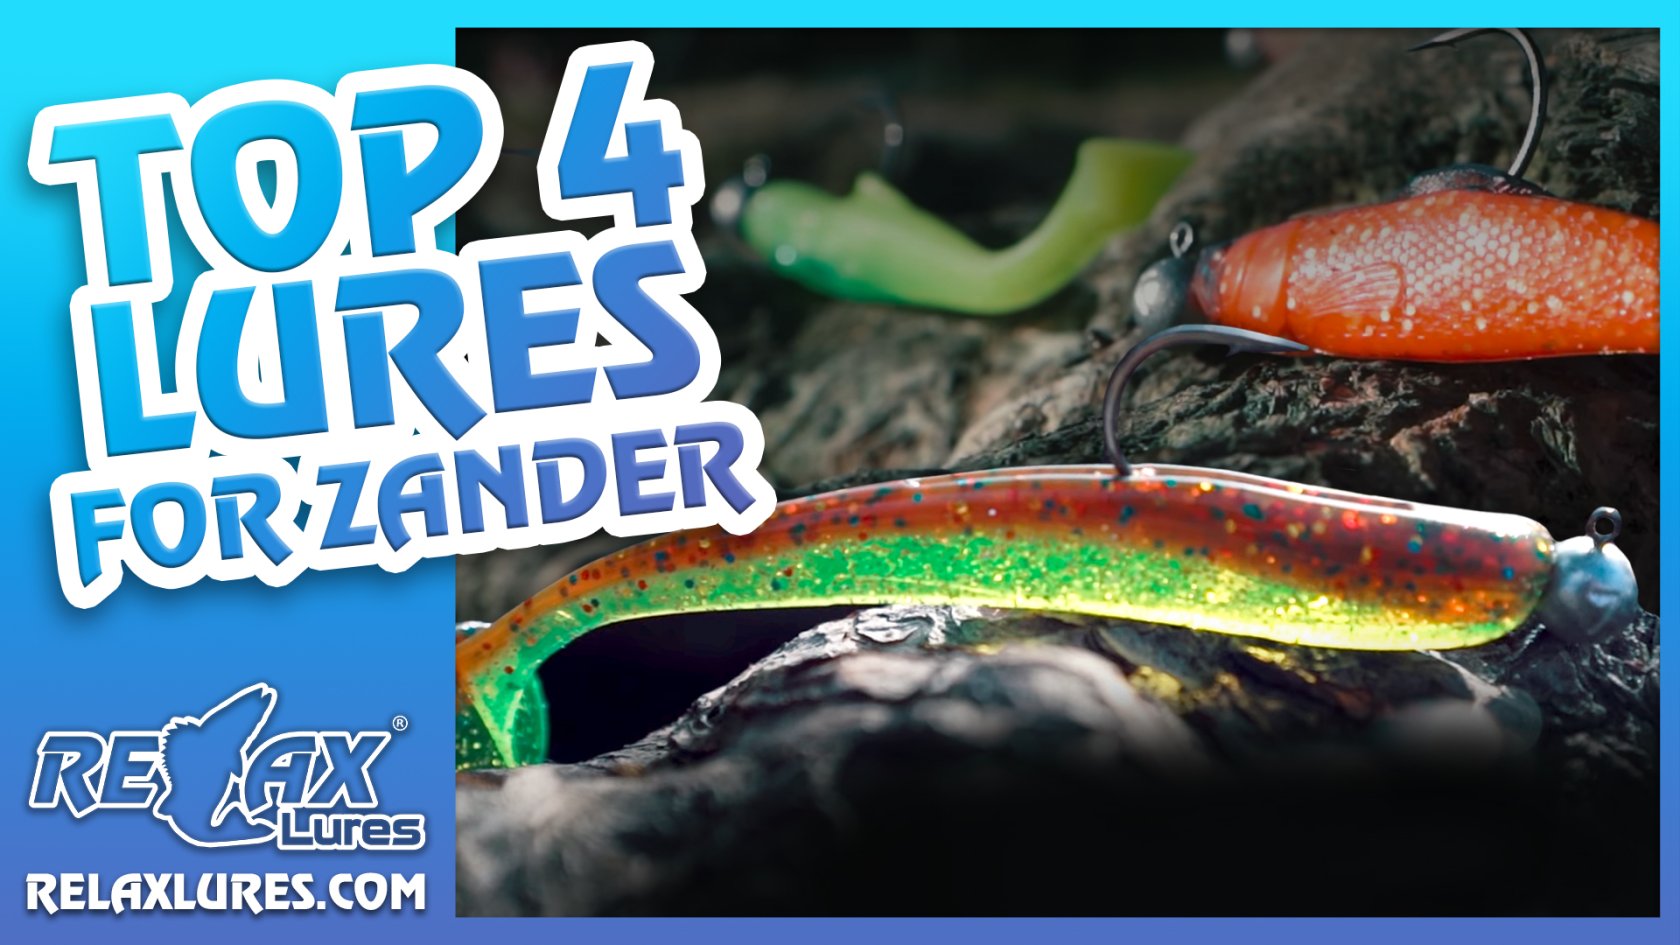 TOP 4 LURES FOR ZANDER - RELAX LURES